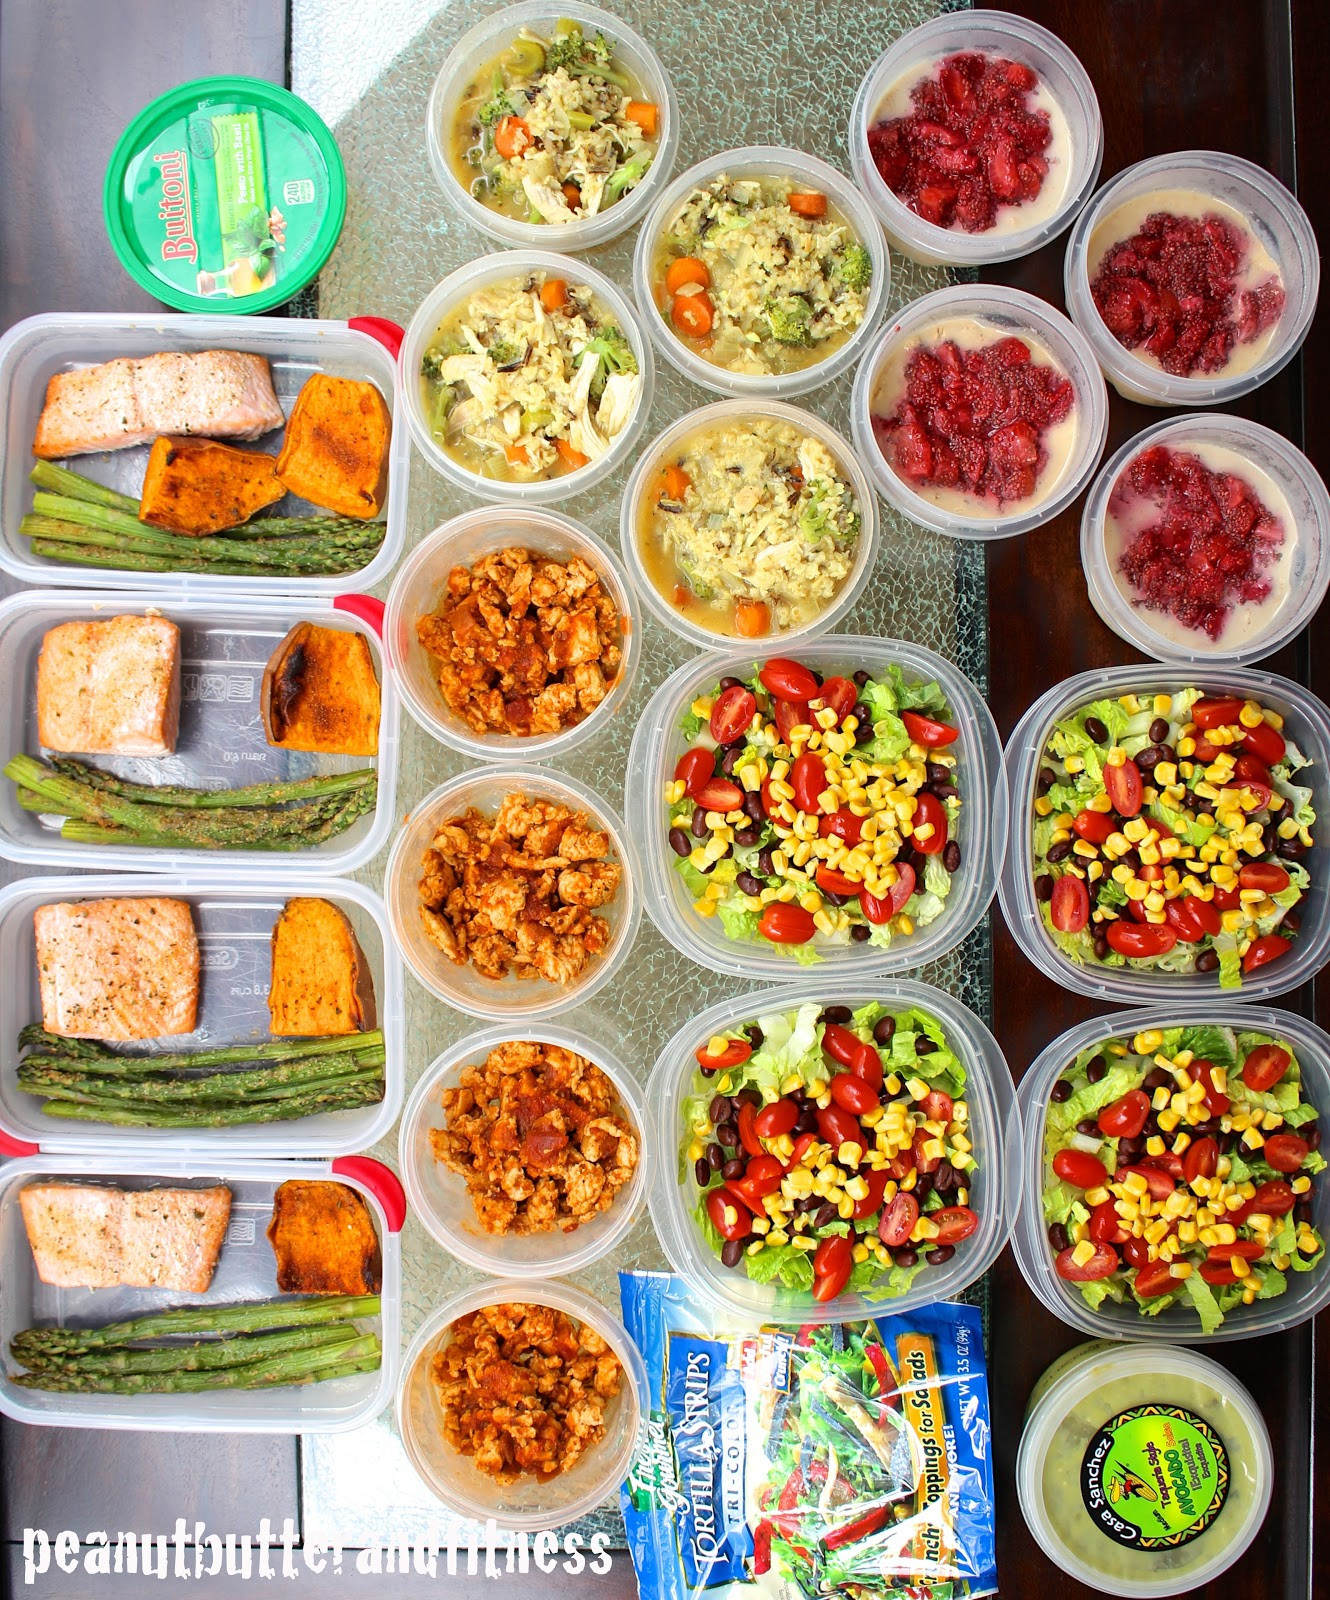 Really Healthy Dinners
 Meal Prep Week of March 7th Peanut Butter and Fitness